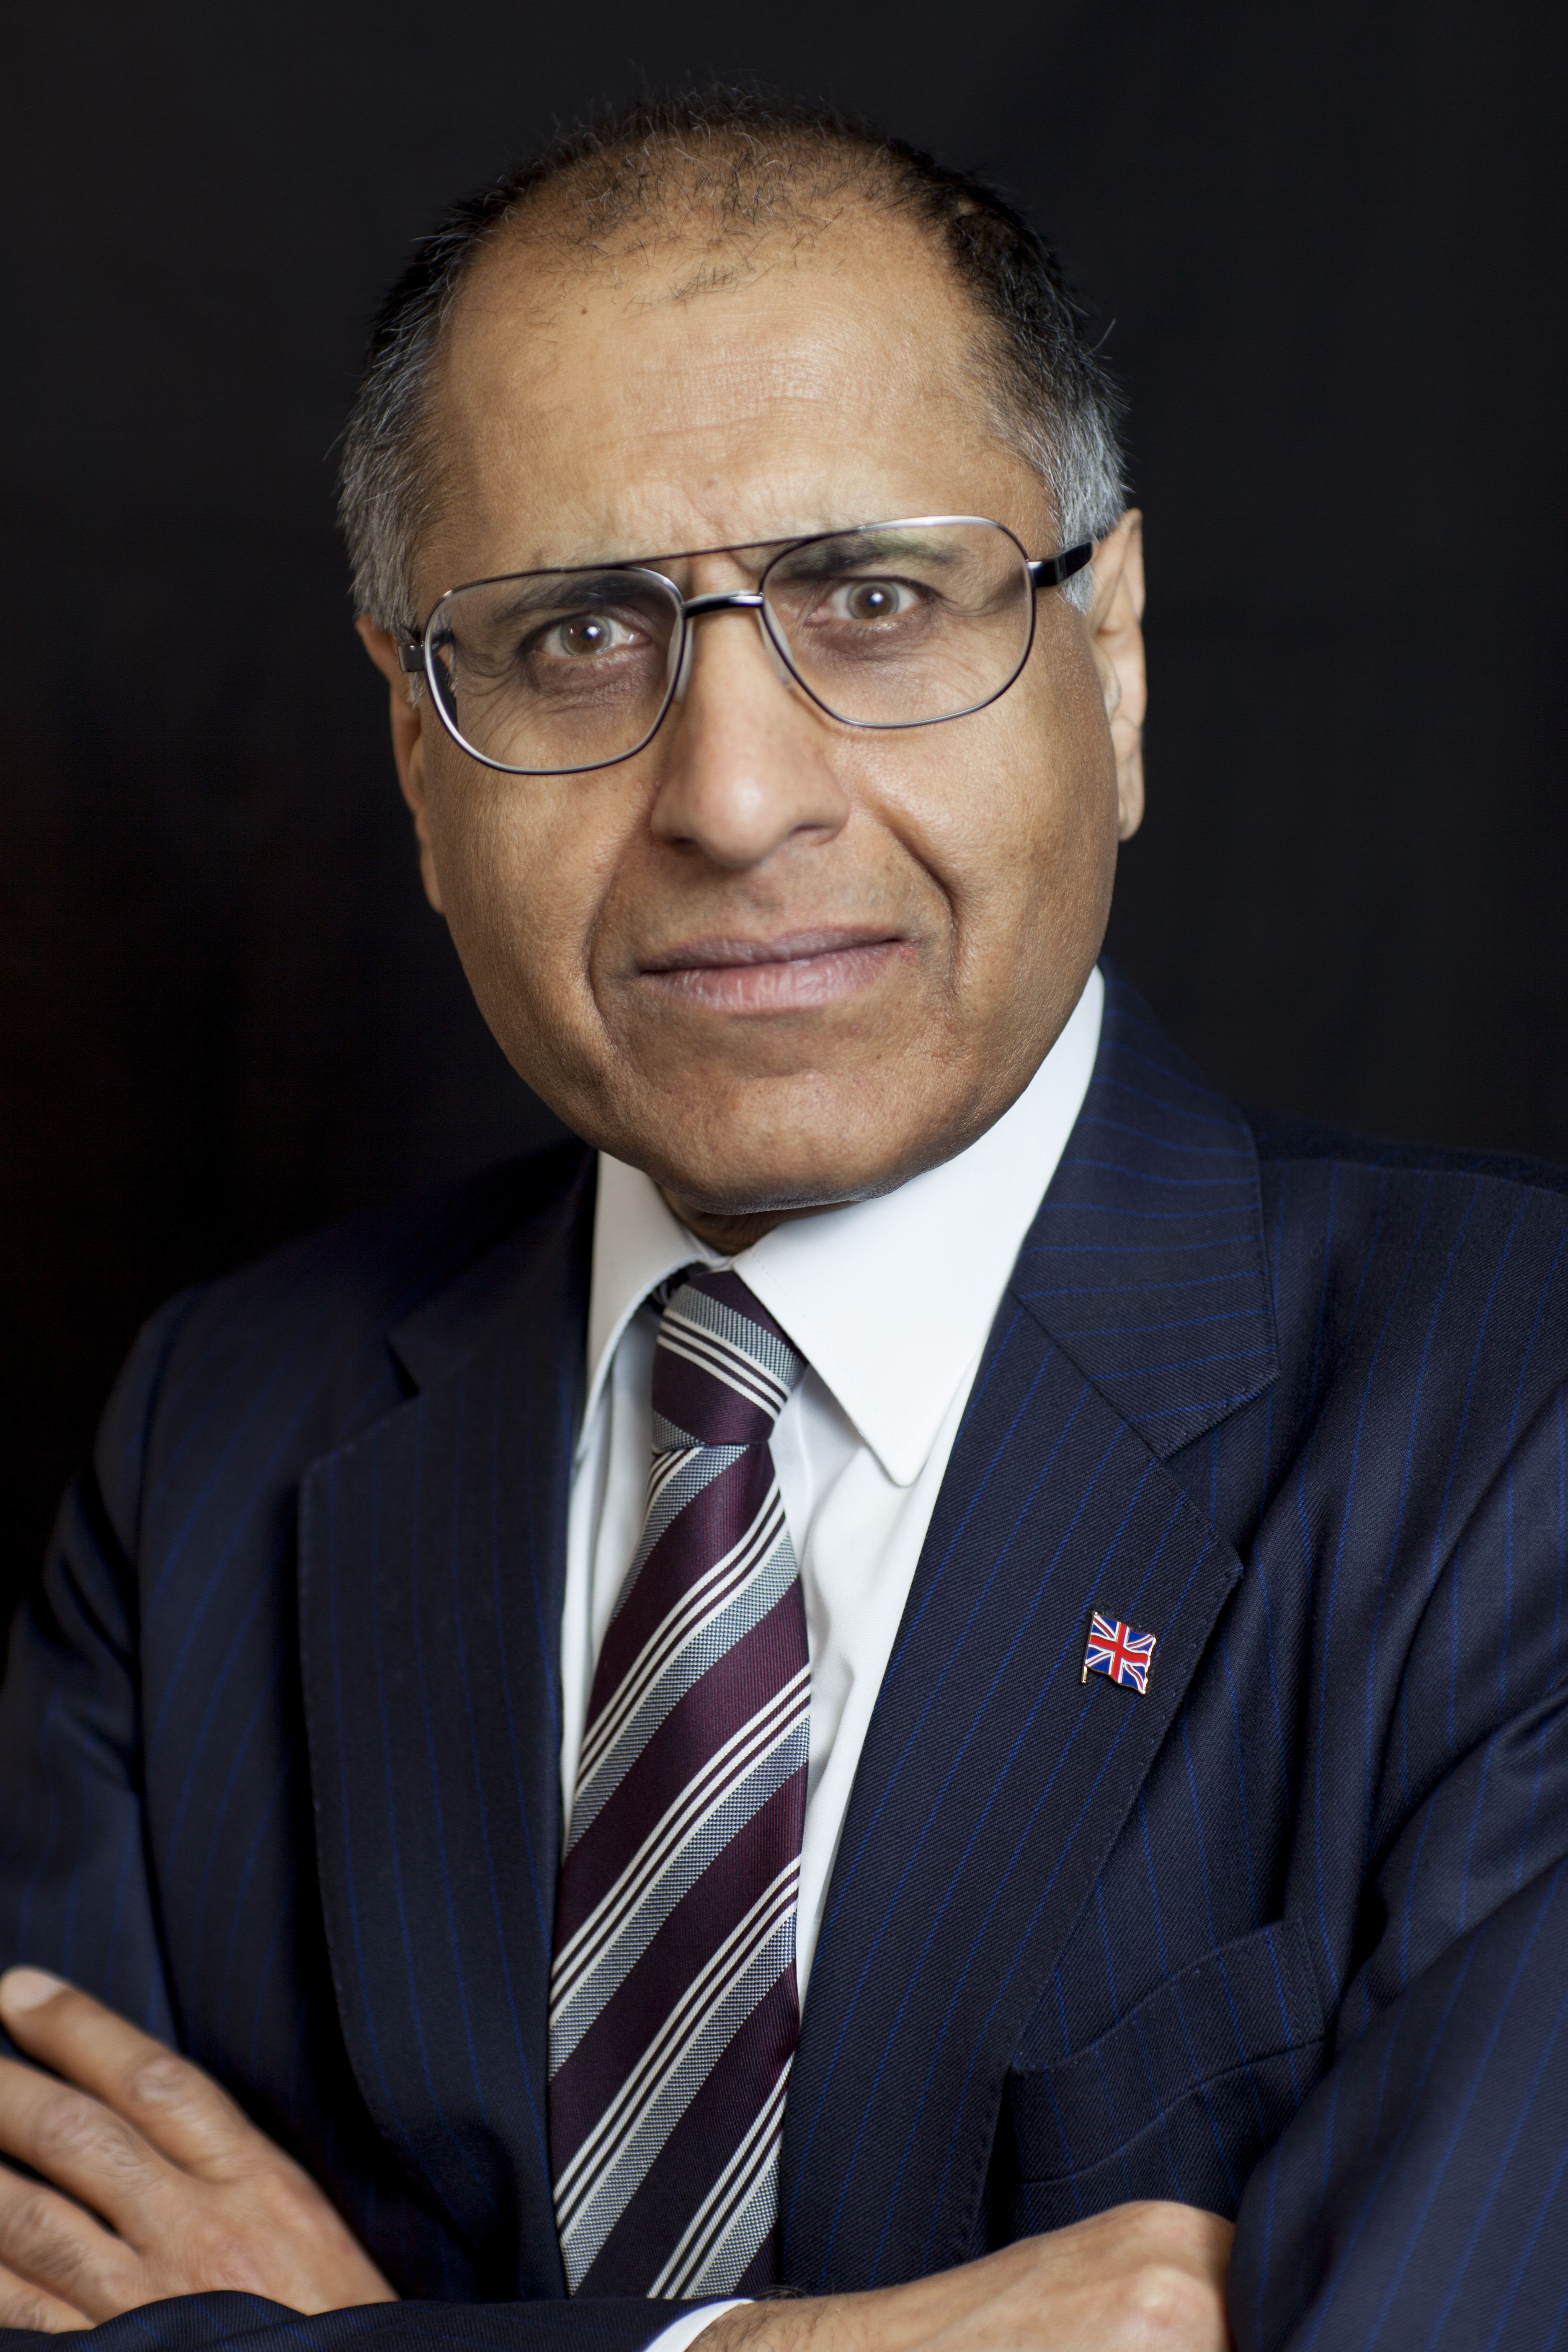 High resolution photo of Mohammed Amin wearing a jacket and tie.